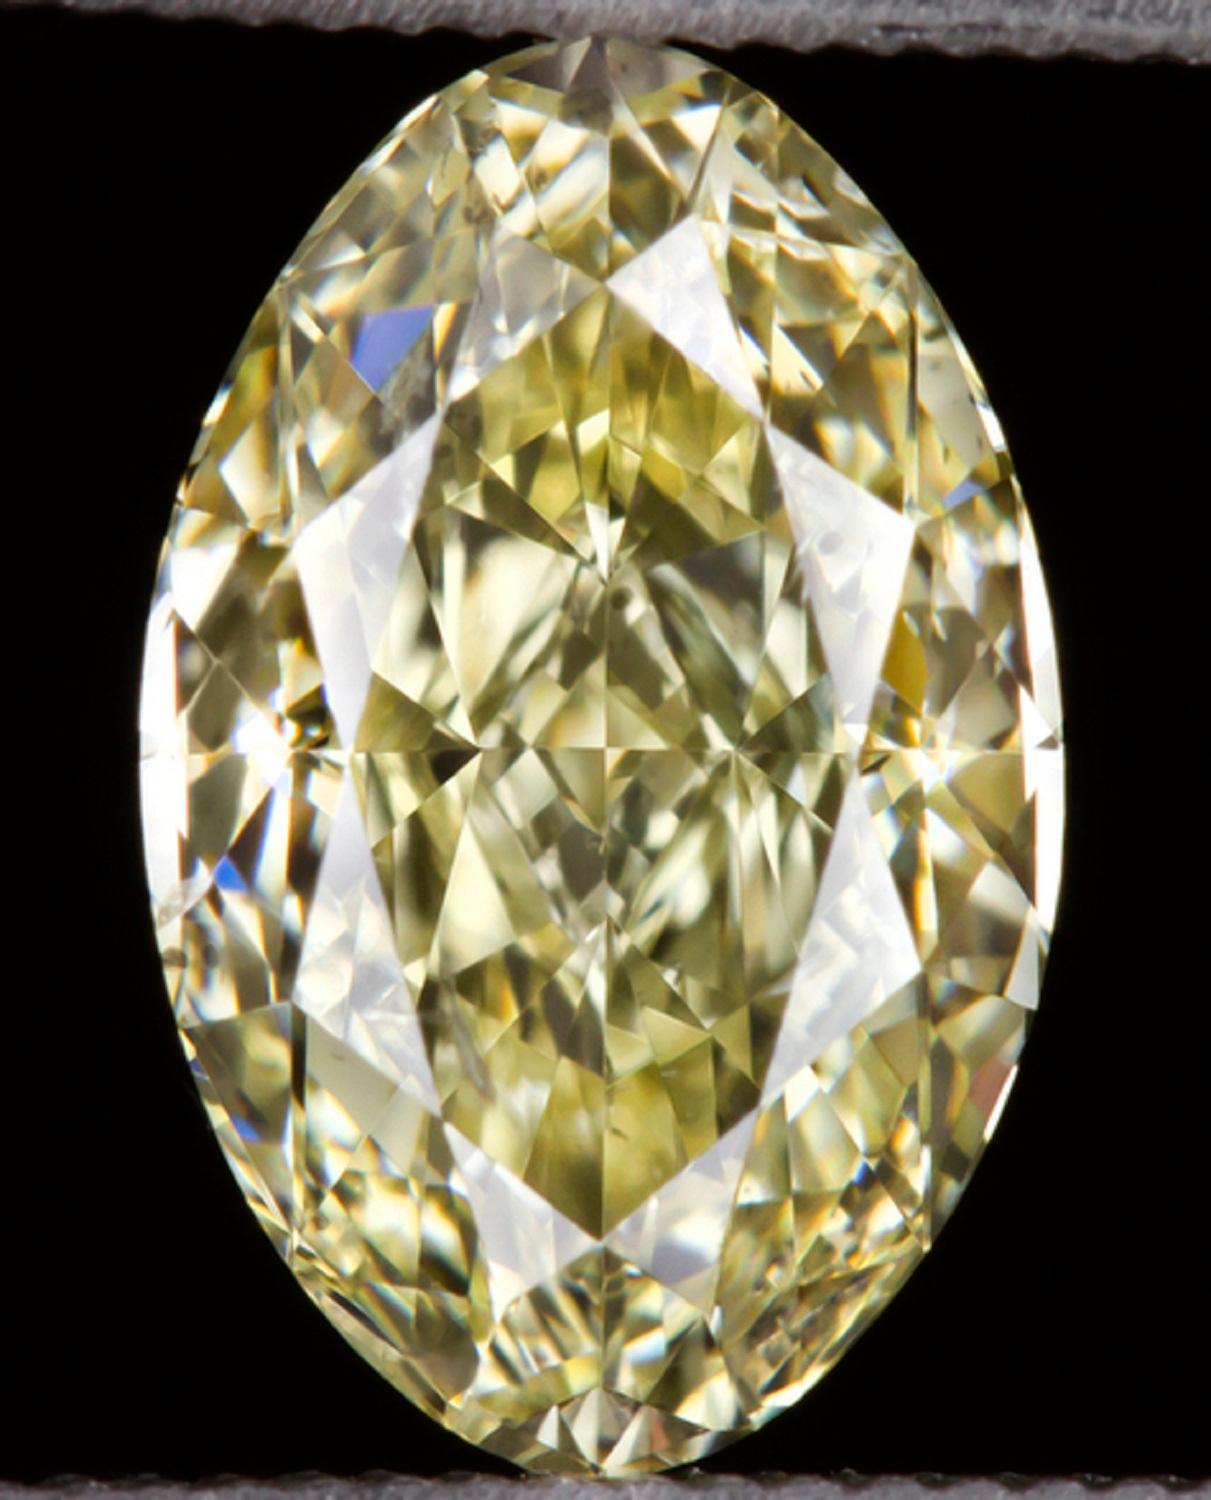  GIA certified diamond is 100% eye clean and has a beautiful light yellow hue! The cut combines aspects of the marquise cut and the oval cut, therefore it can be referred to as a “moval.” This is a very rare shape! Movals were only cut with some